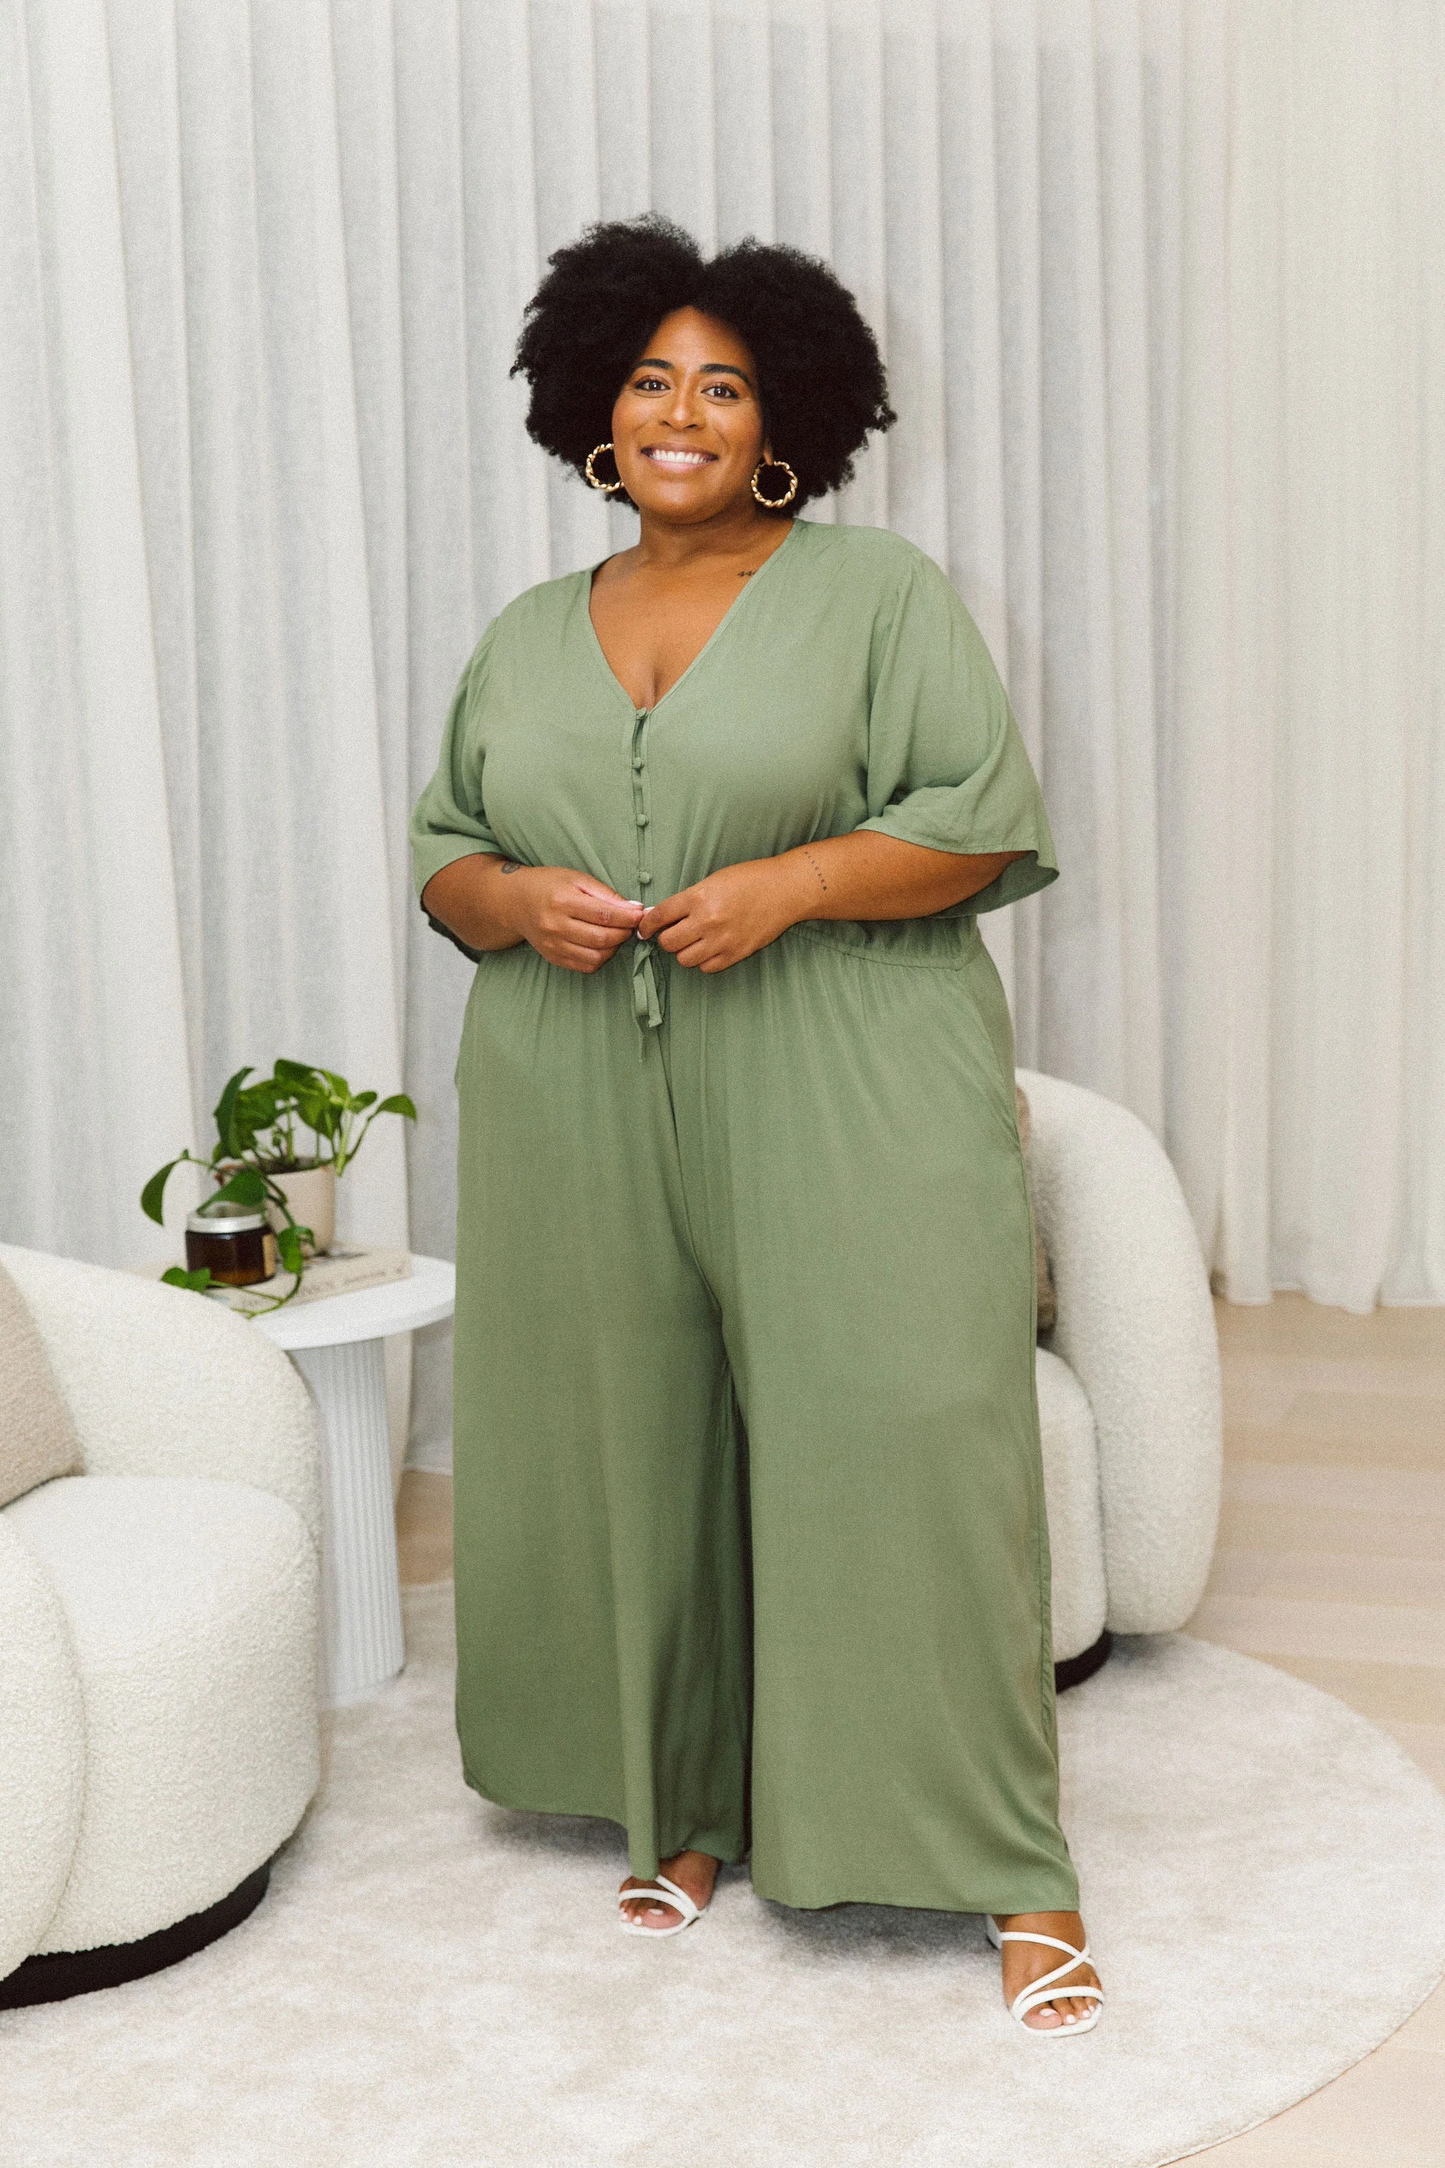 Morgan Jumpsuit - Khaki | Peach the Label | Super fun, super floaty and creates an instant one-item outfit! We love how easy to wear this jumpsuit is with its versatile fit - cinch it in as much or as little a